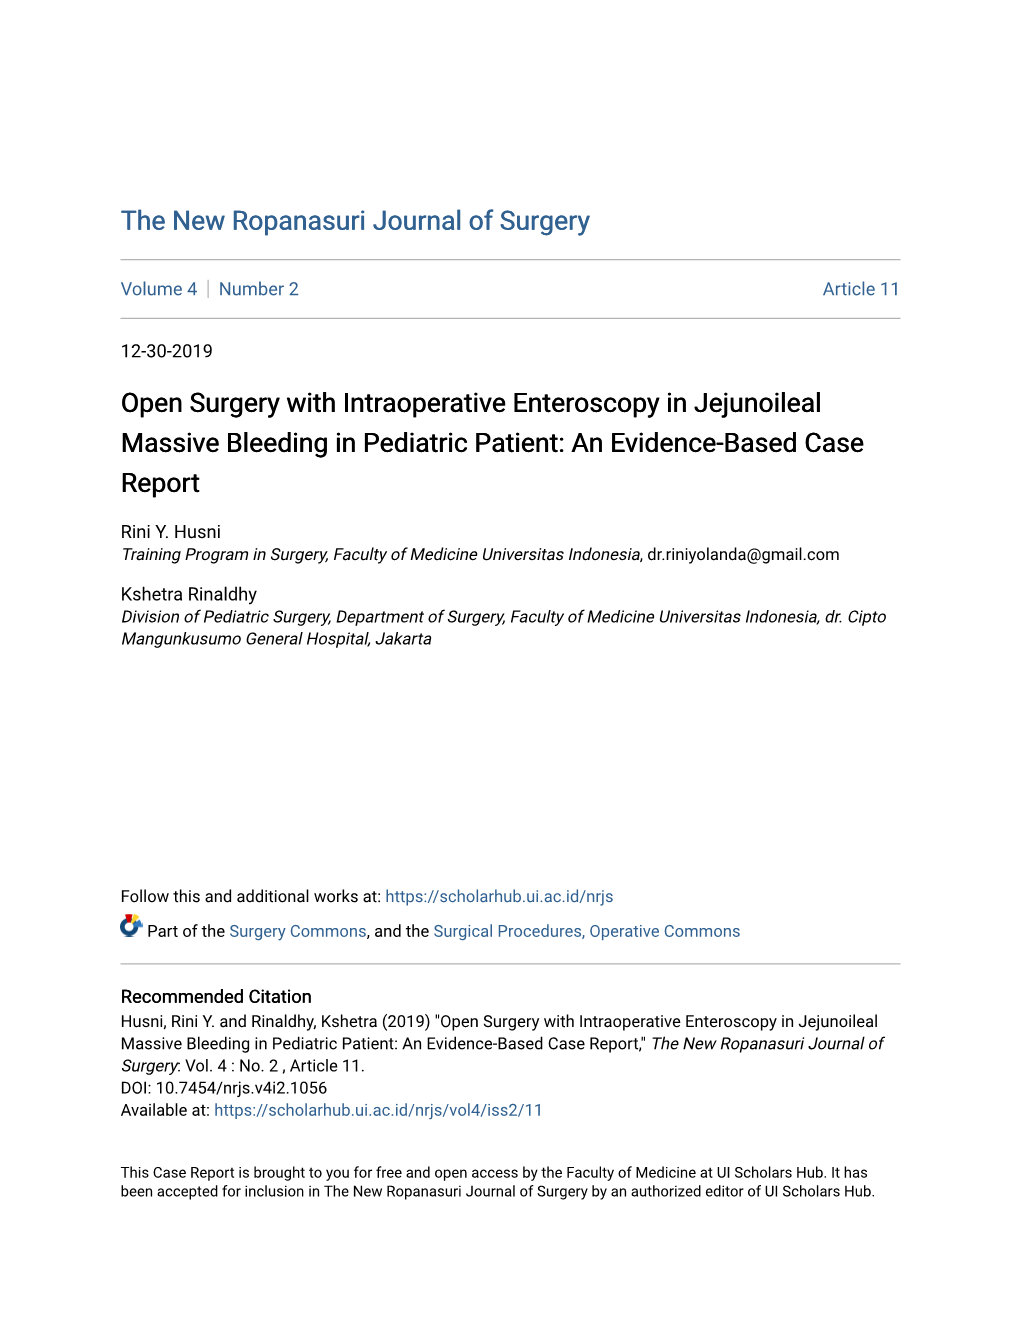 Open Surgery with Intraoperative Enteroscopy in Jejunoileal Massive Bleeding in Pediatric Patient: an Evidence-Based Case Report